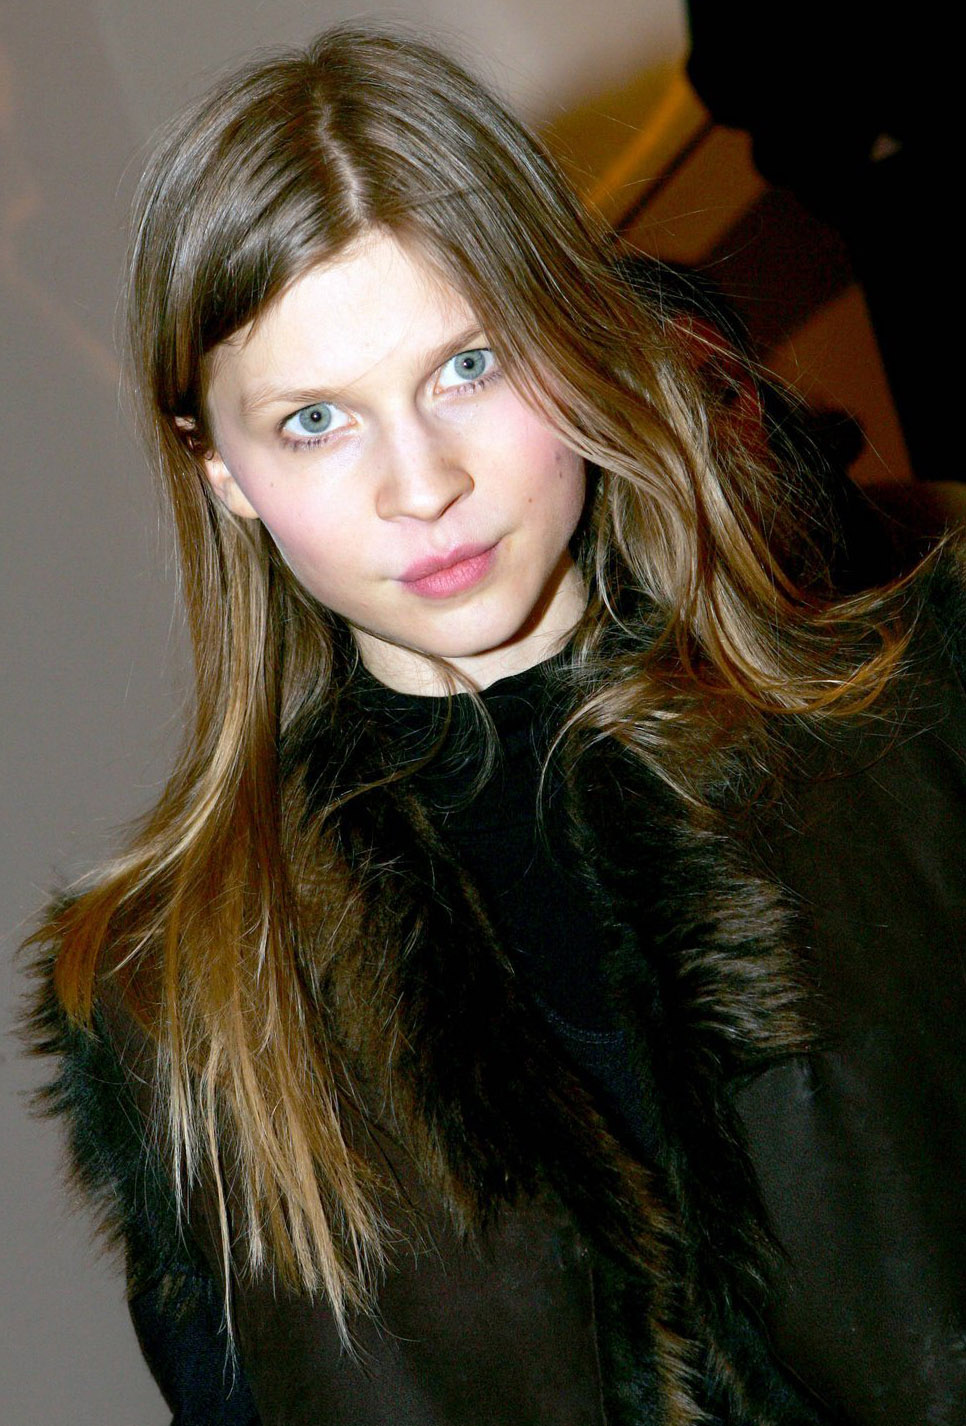 Clemence Poesy photo 105 of 300 pics, wallpaper - photo #245349 - ThePlace2